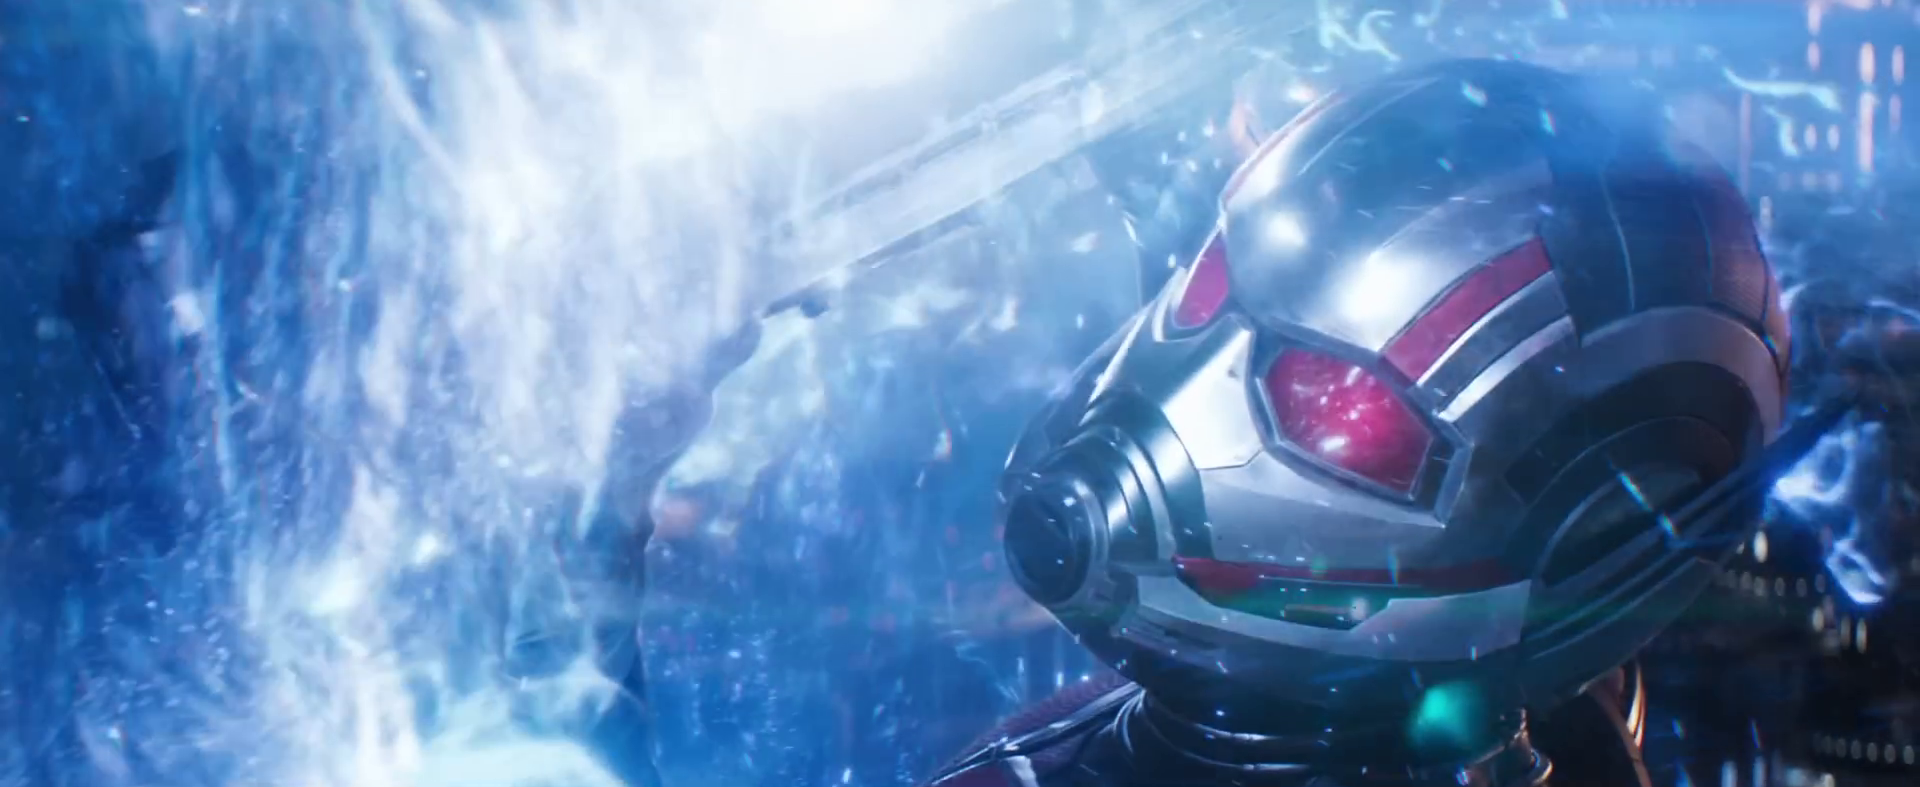 All About All About 'Ant-Man and the Wasp: Quantumania' (TV Episode 2022)  - IMDb